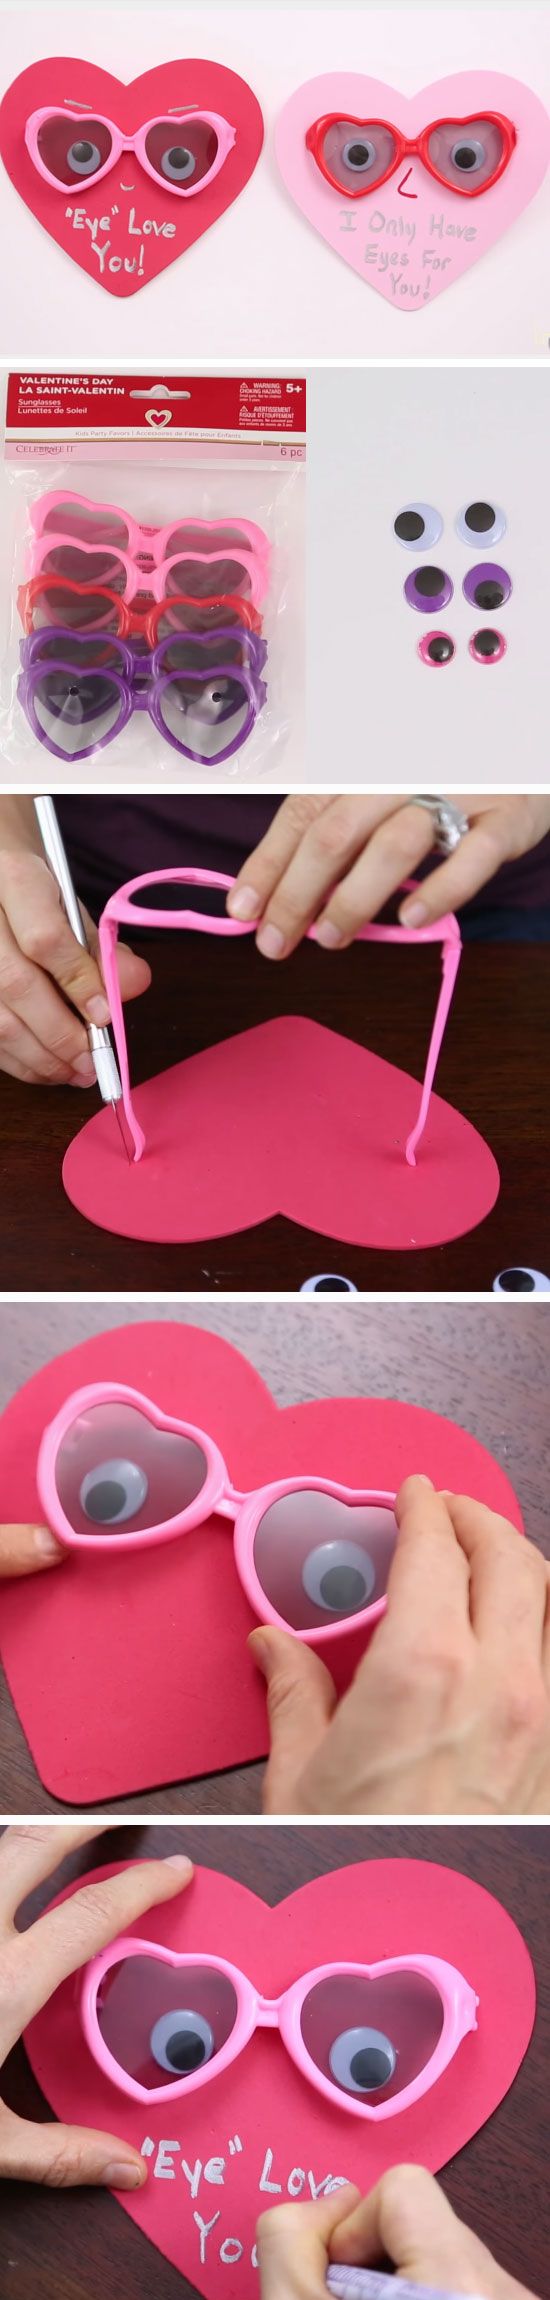 33 Simple Diy Valentines Cards Perfect For Valentine S Day This Year